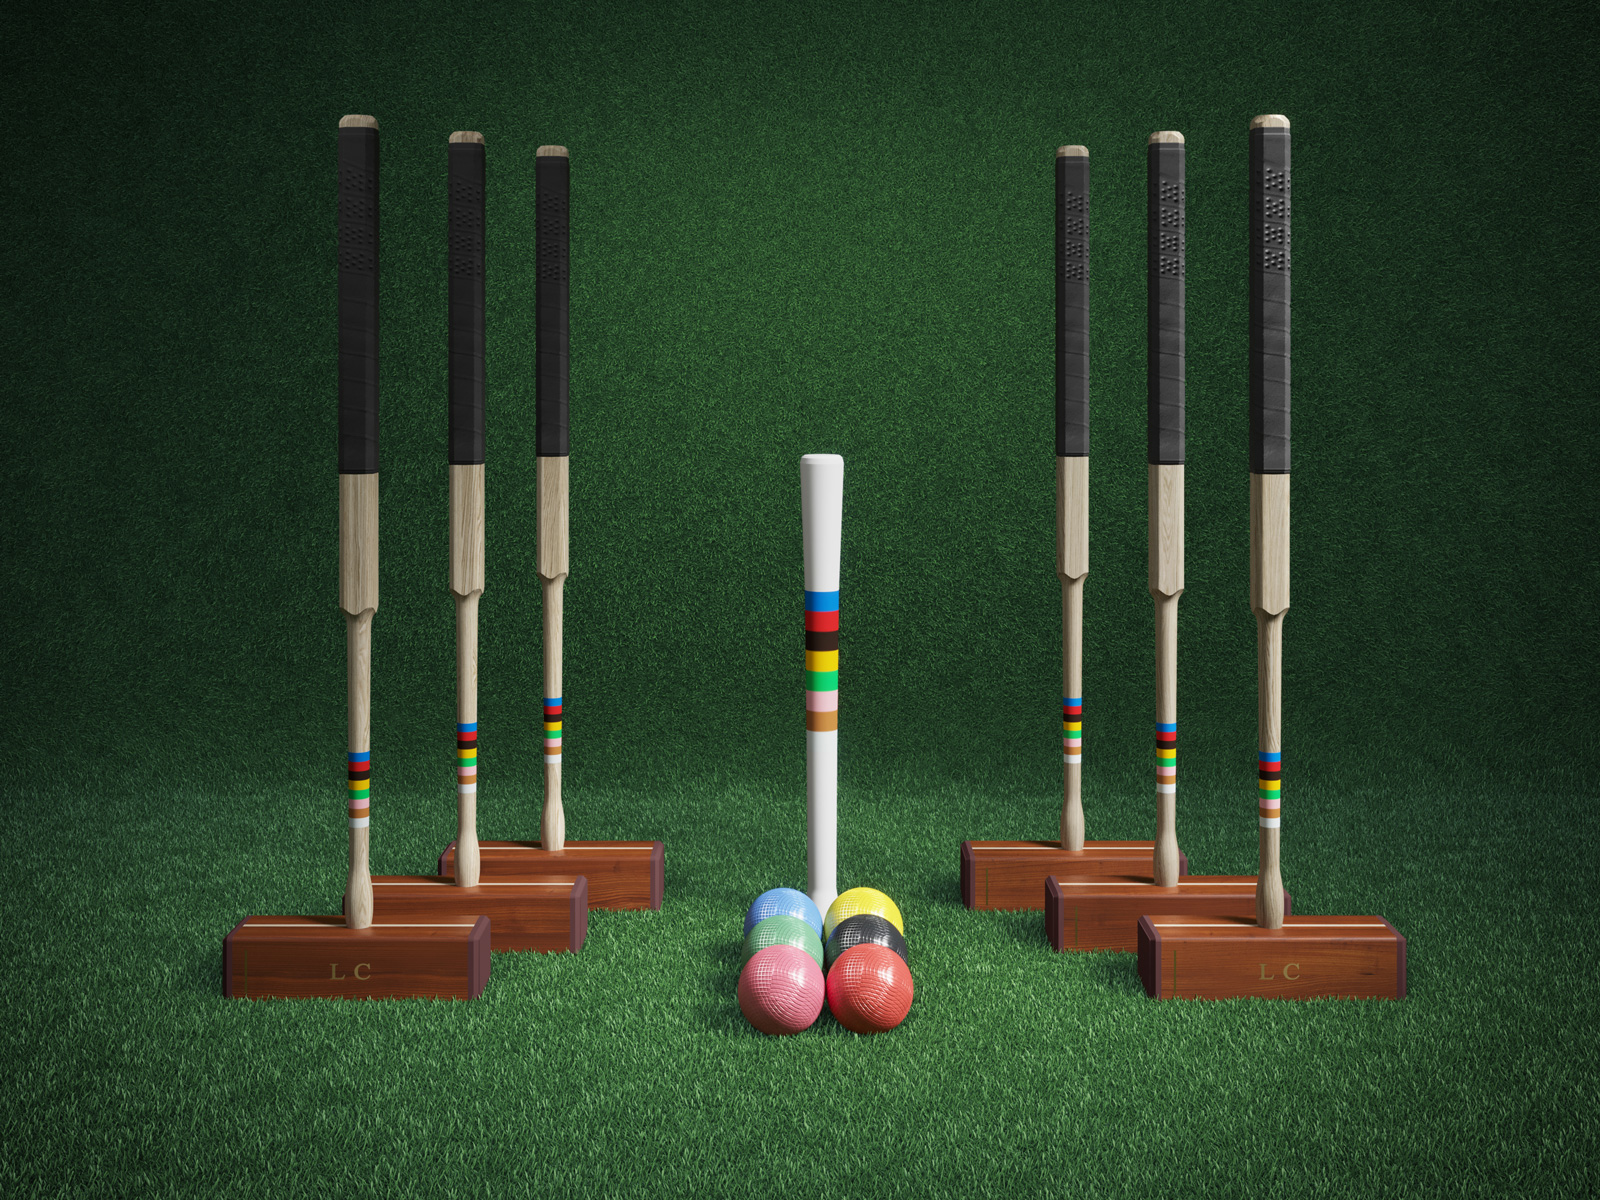 A set of gaming of equipment for the game croquet, made of rich dark and light wood, set against a green turf background.